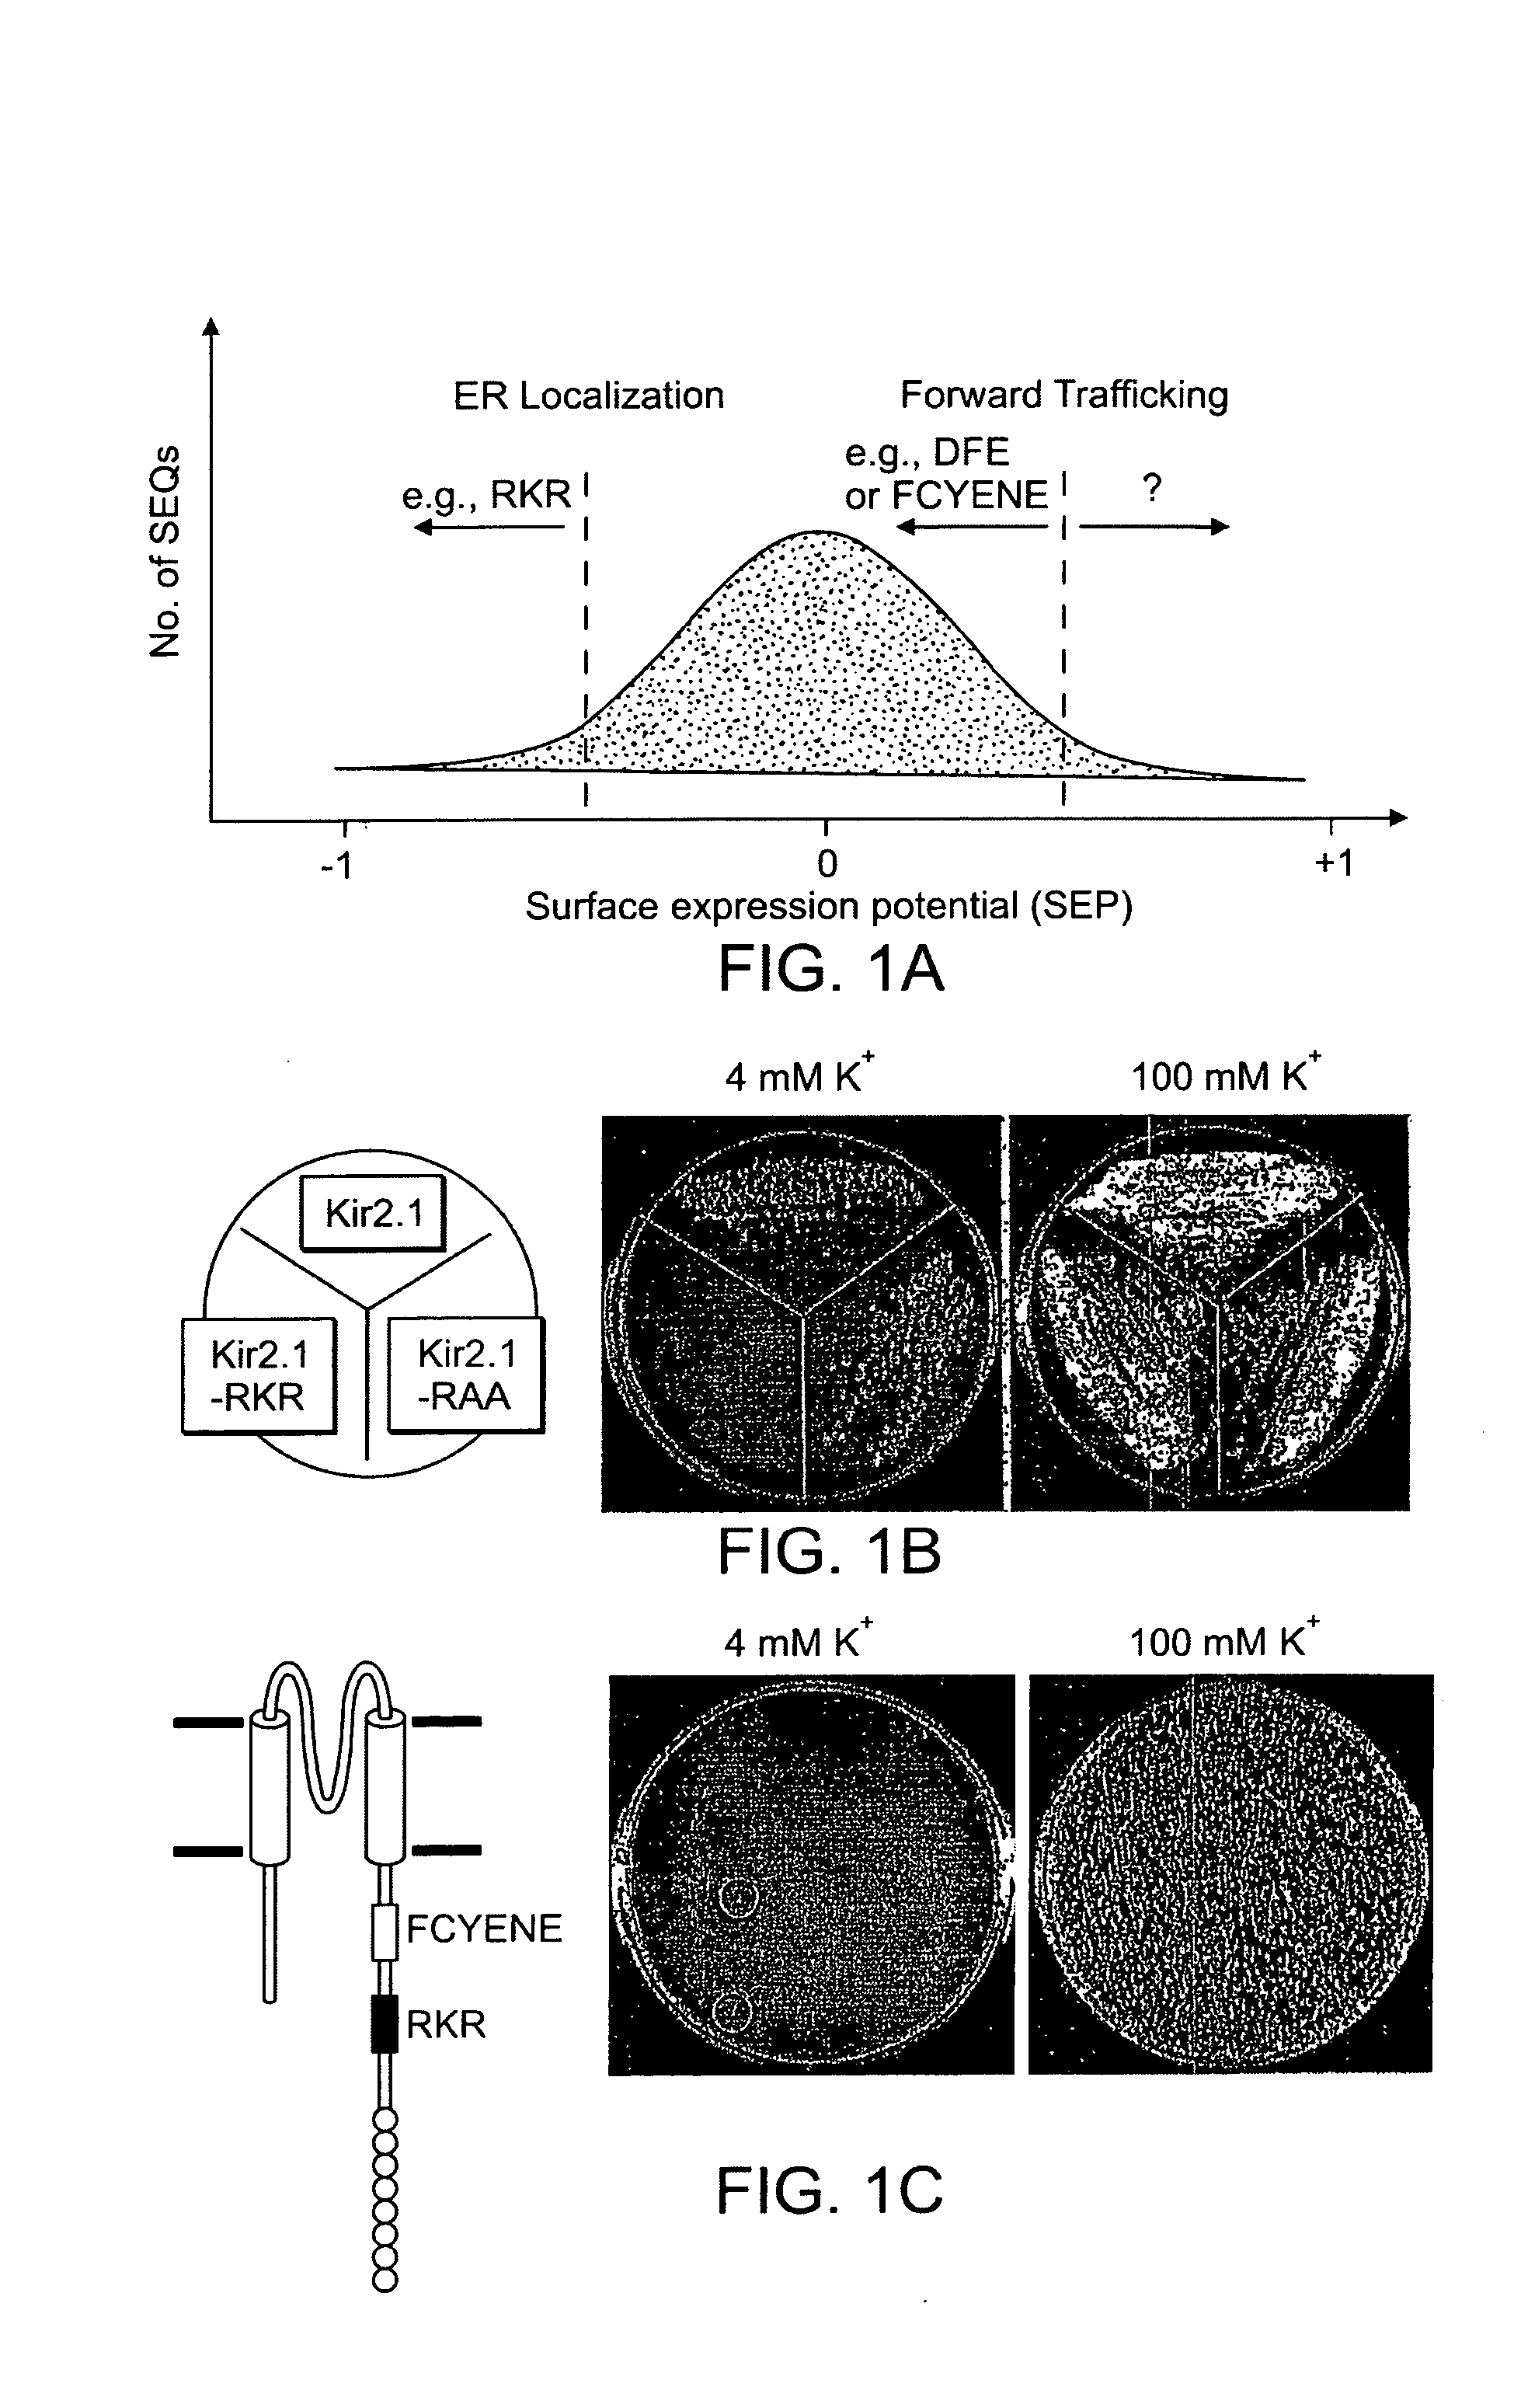 Biomolecule partition motifs and uses thereof